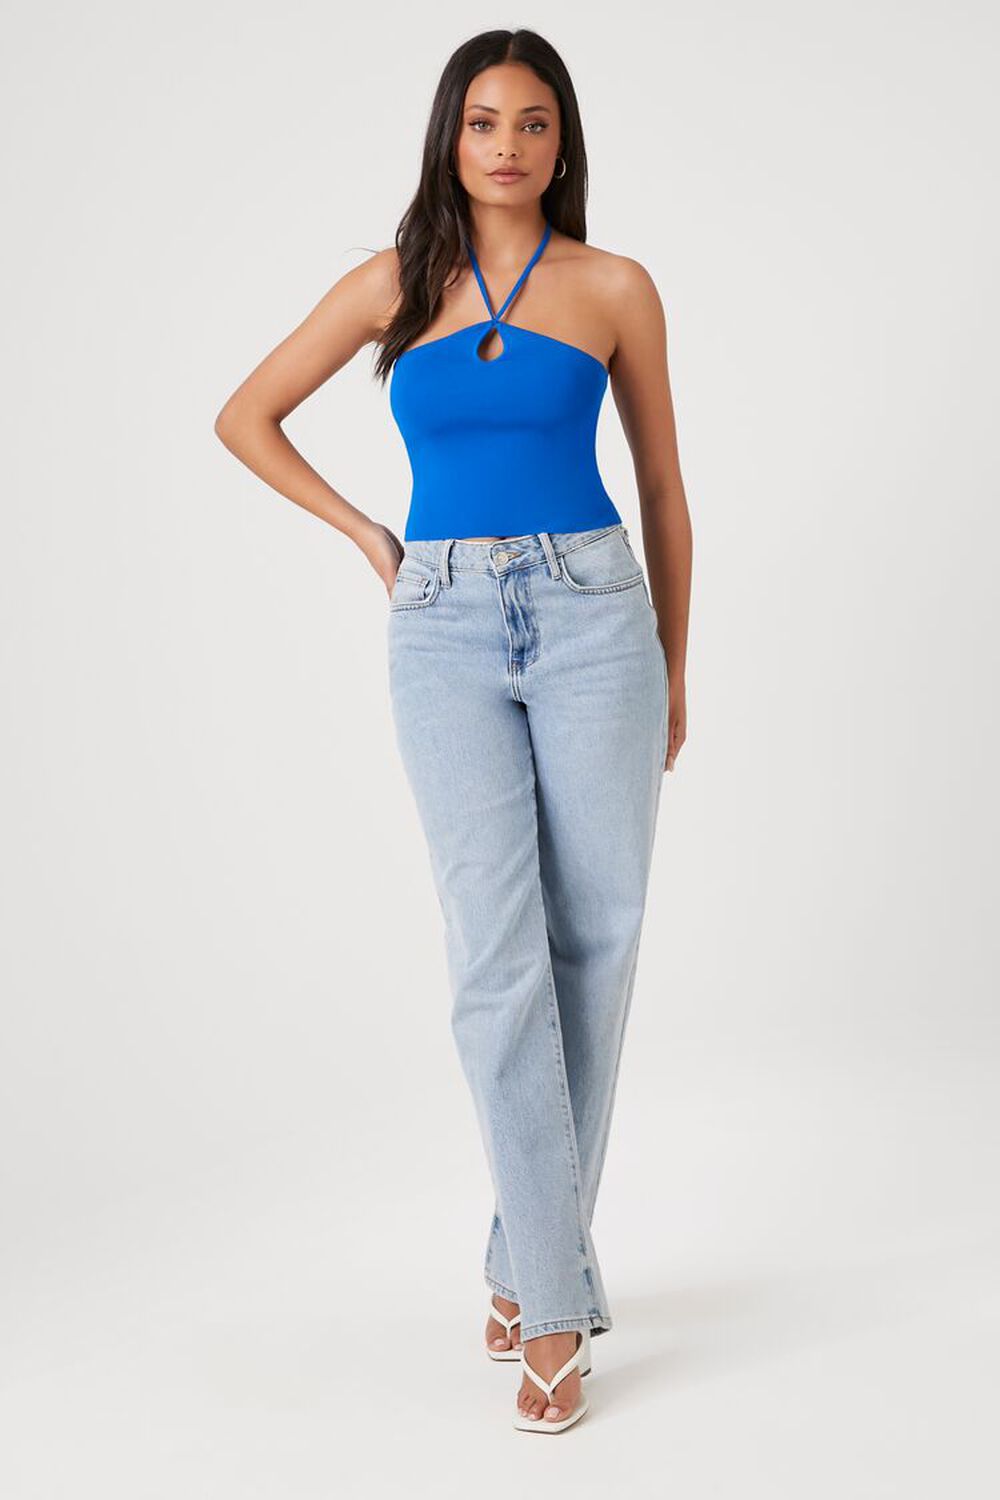 BLUE Ribbed Sweater-Knit Crop Top, image 4